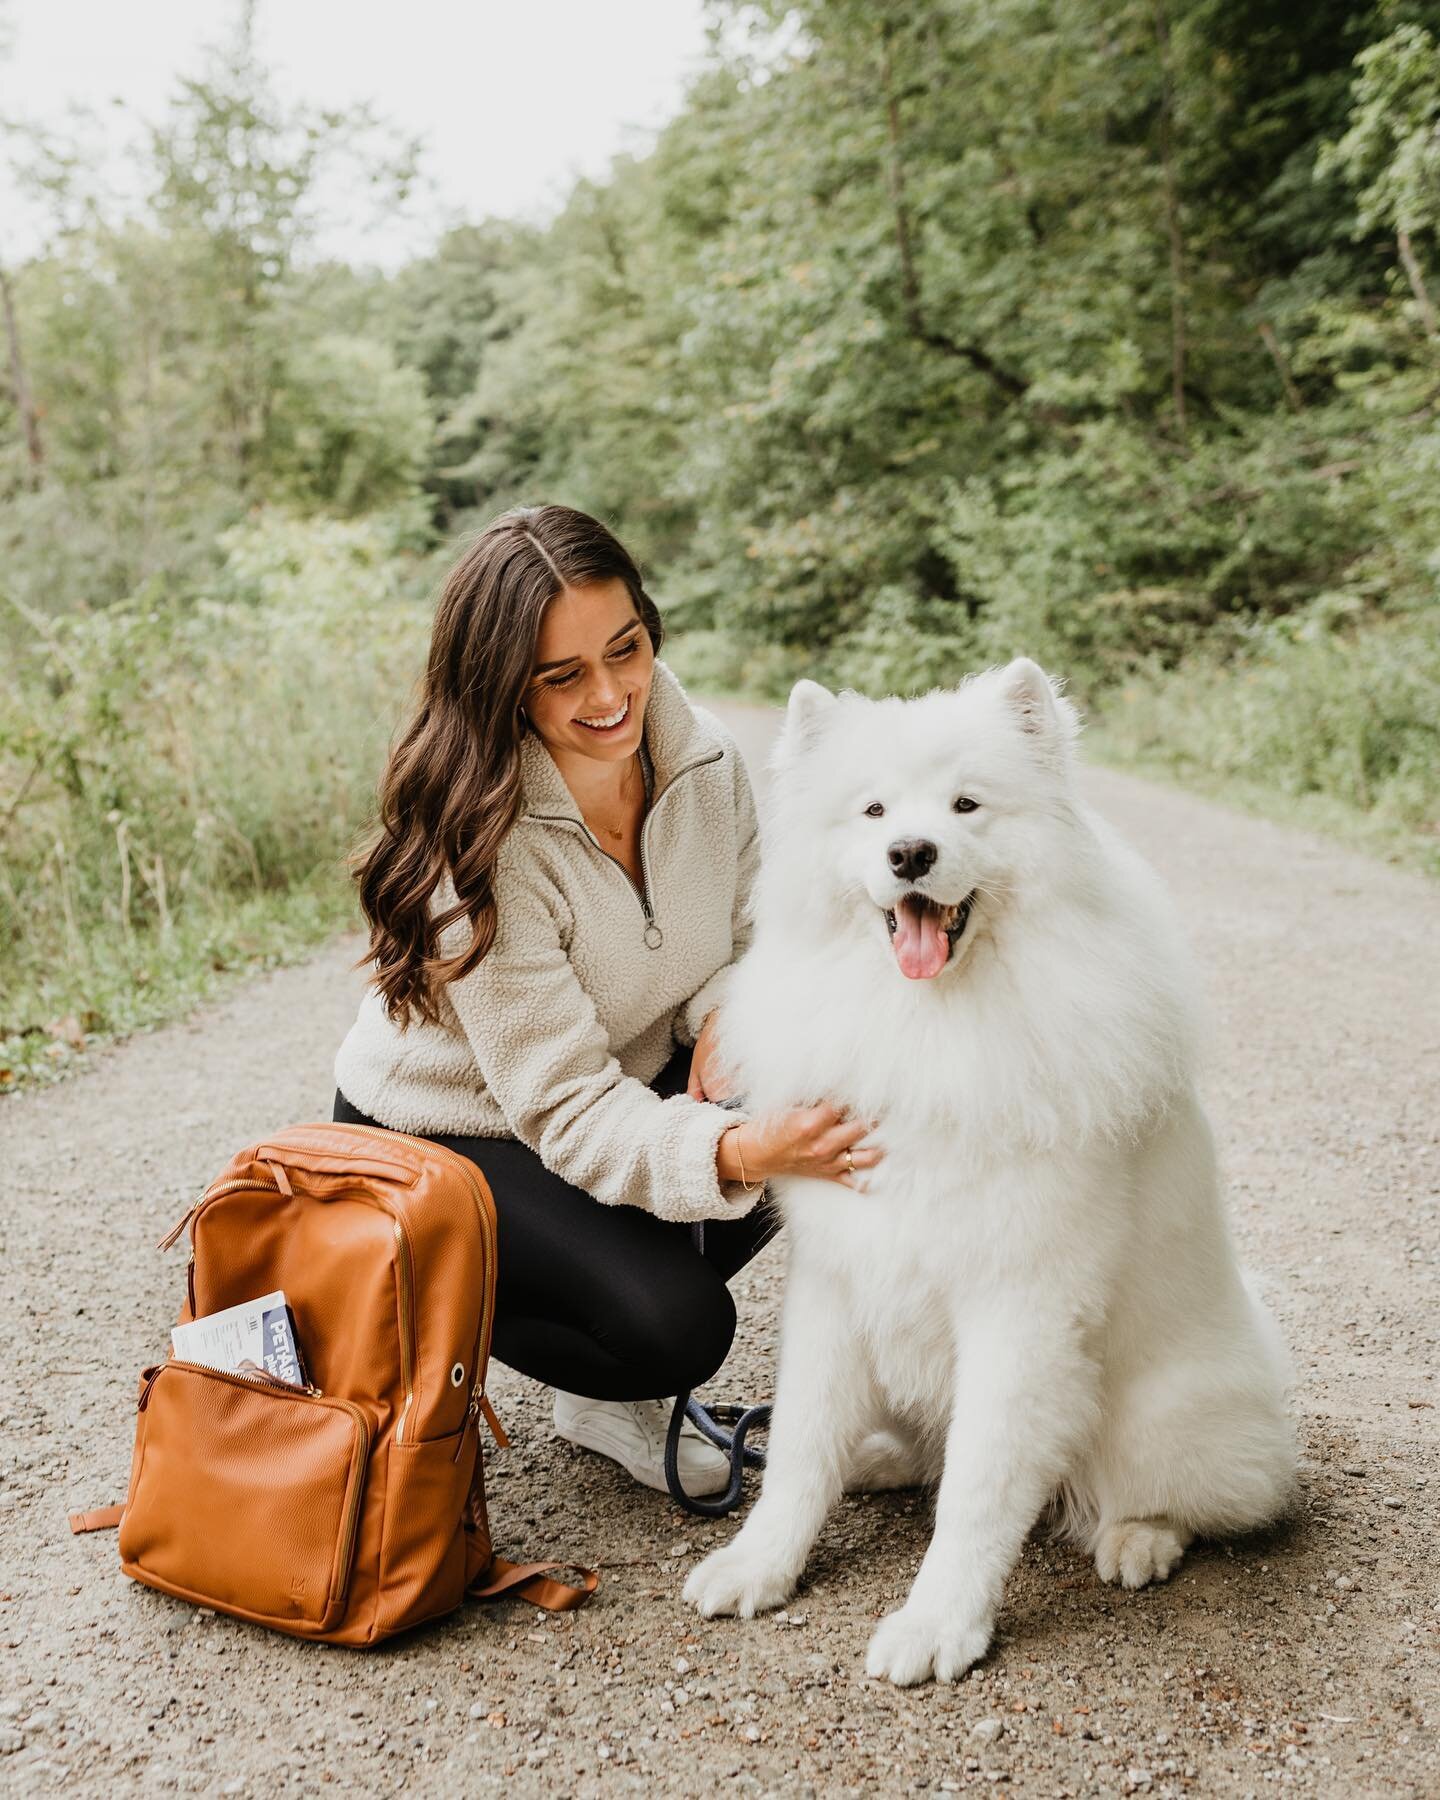 It's such a beautiful time of year to get outside! We love taking Leo to this nature tail and always make sure that he is up to date on his @PetArmor Plus Flea &amp; Tick medication before we go. Check out my story today for a swipe up link to a coup